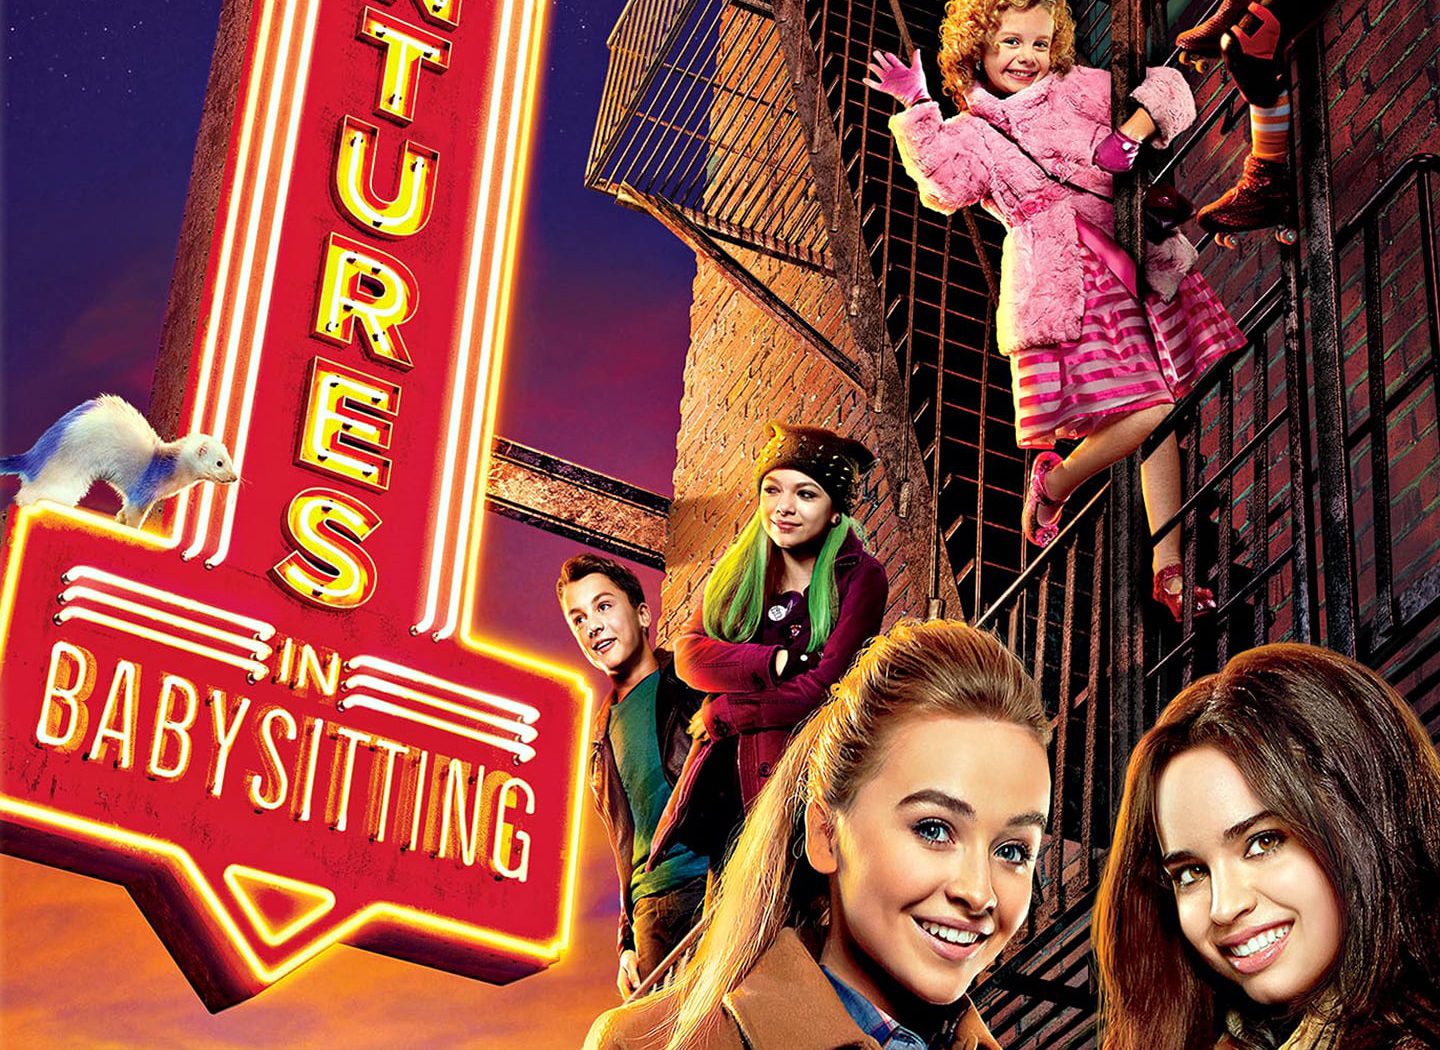 Poster for the movie "Adventures in Babysitting"